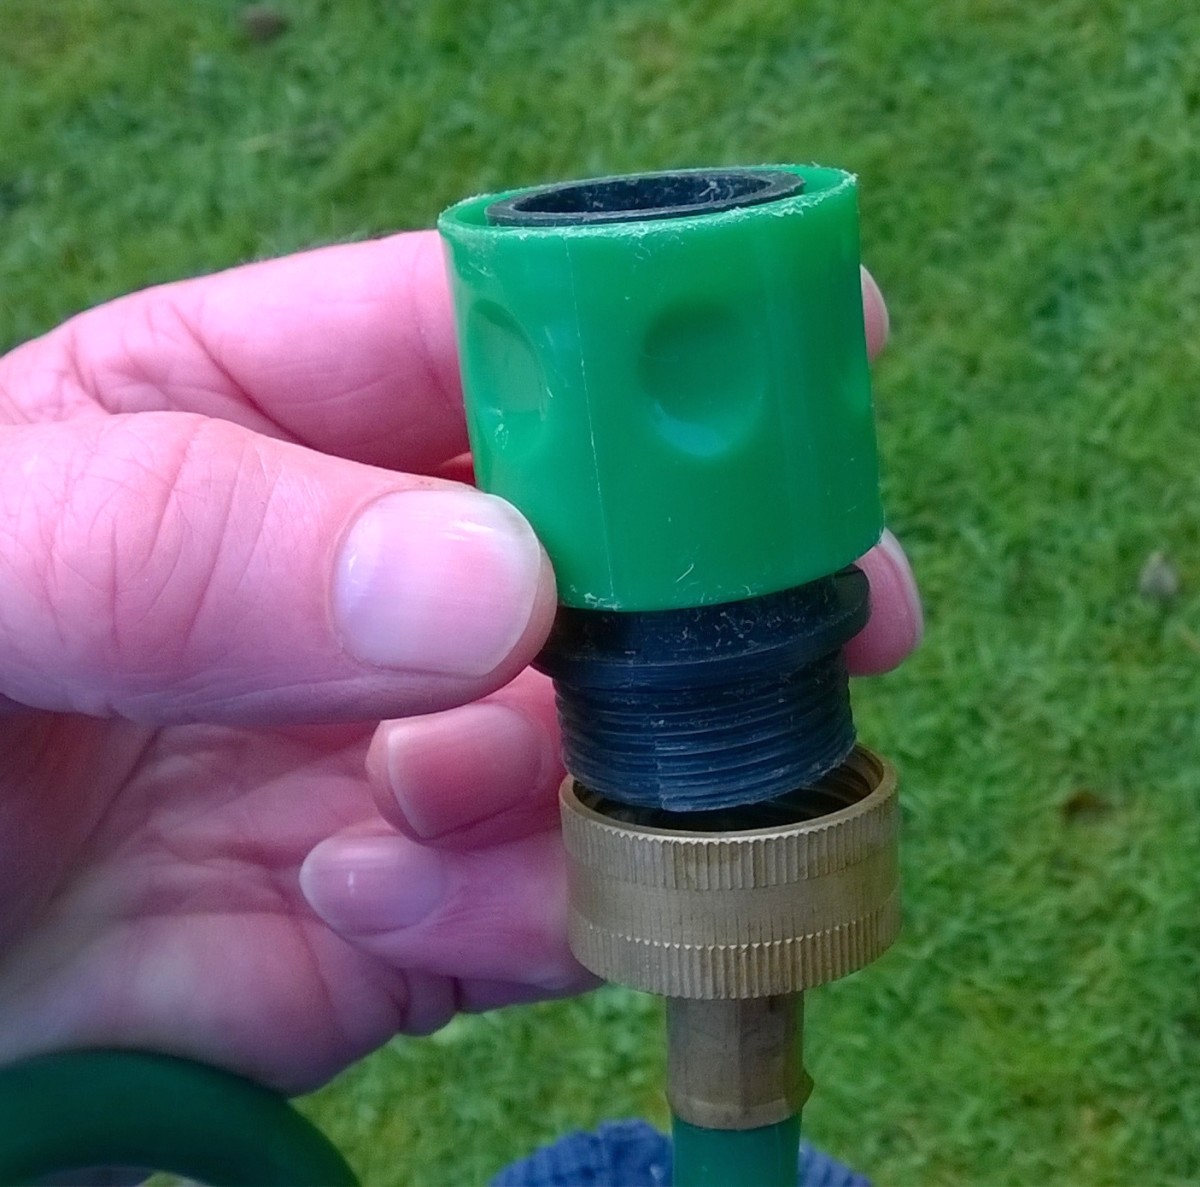 A flat hose and spiral hose adapter for connecting these type of hoses to a push fit tap connector.